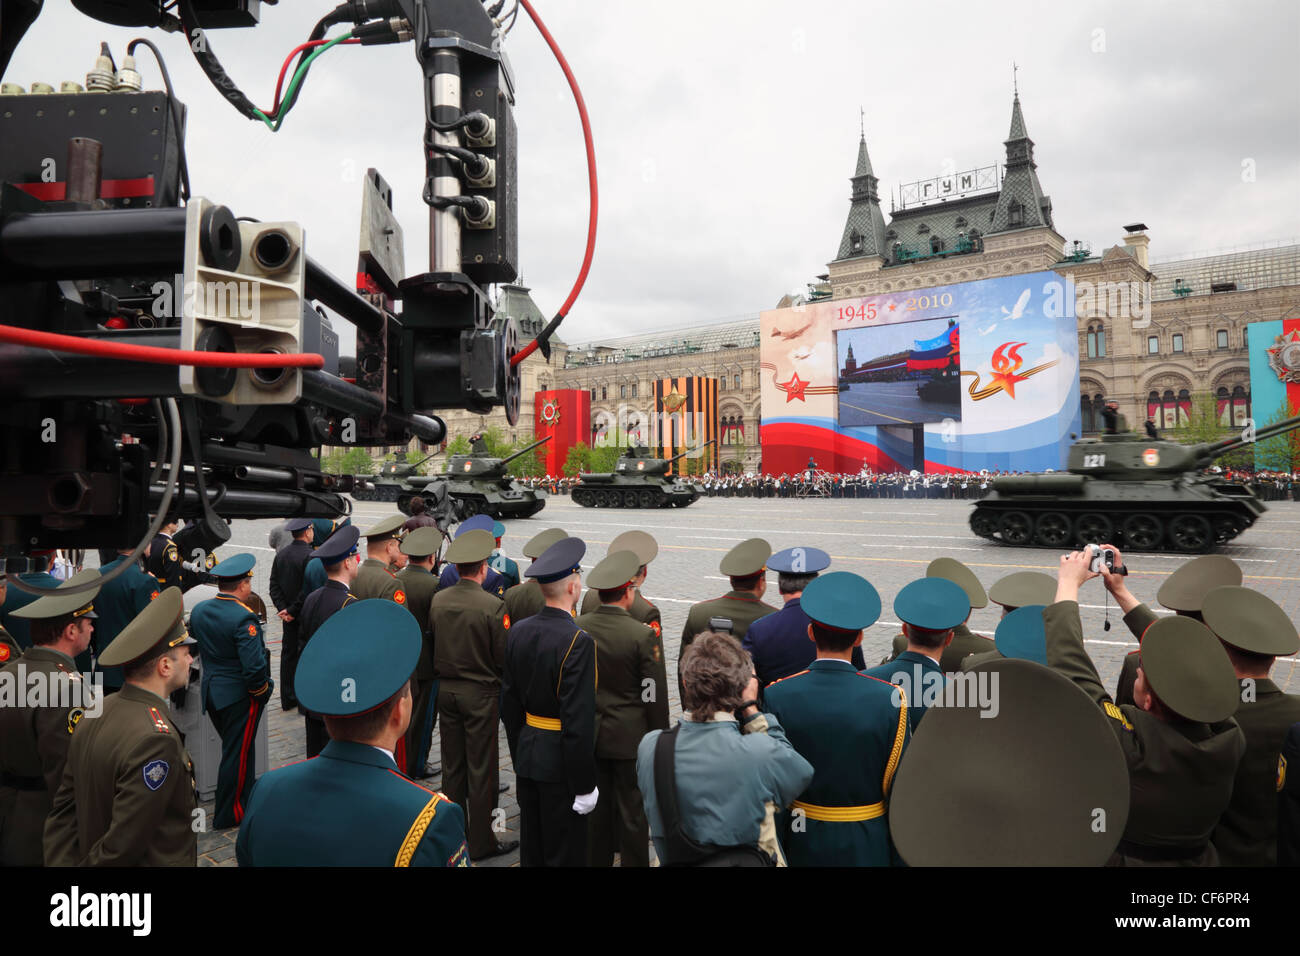 MOSCOW MAY 6 Soldiers tanks participate rehearsal honor Great Patriotic War victory TV camera record Red Square May 6 2010 Stock Photo